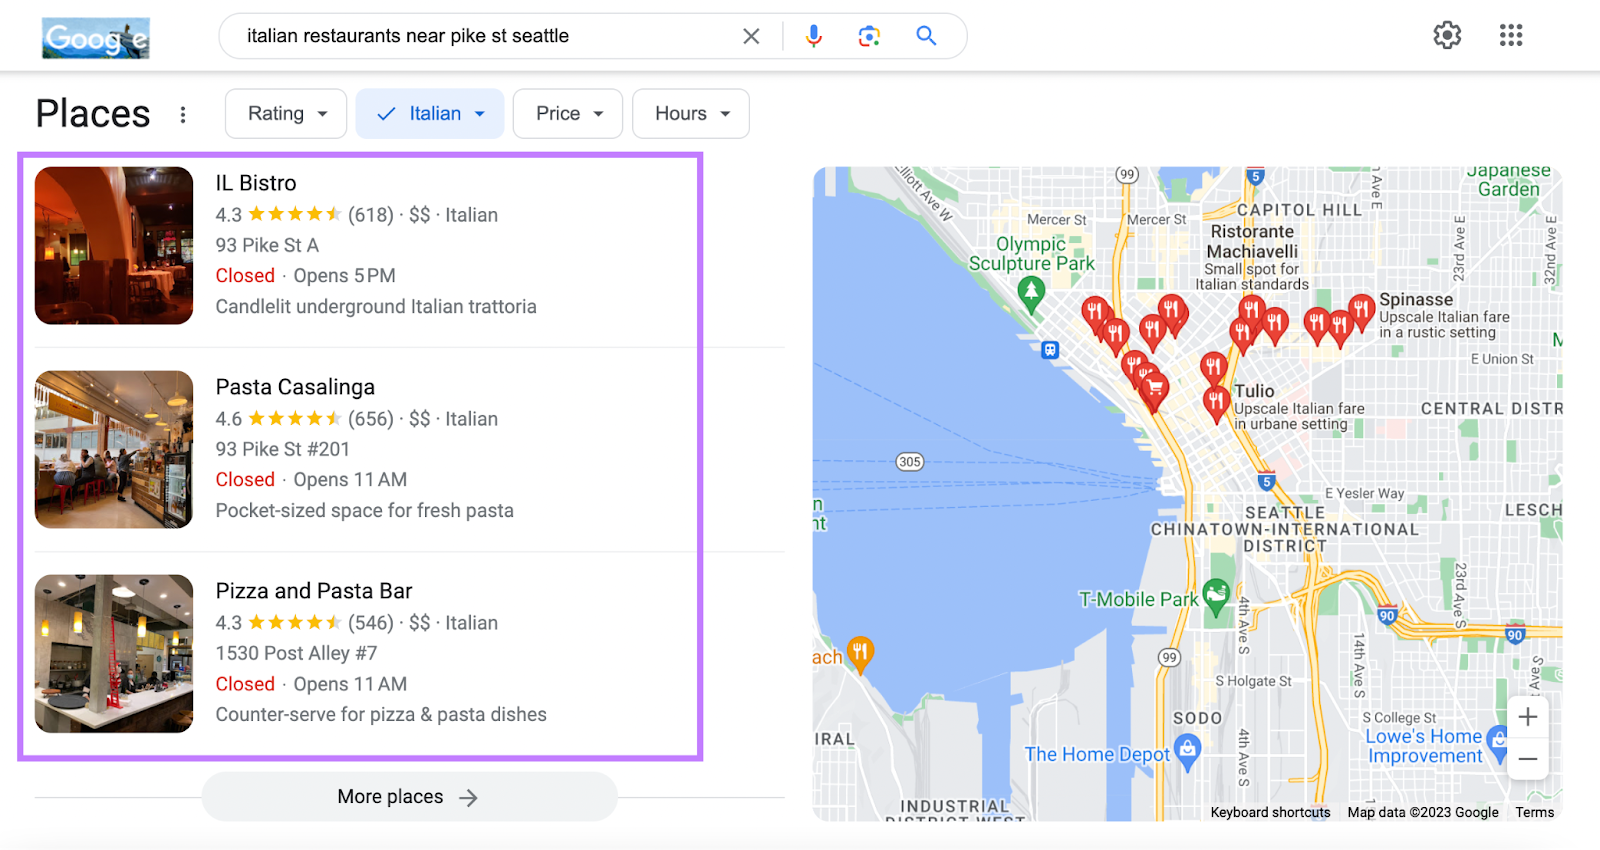 Google local pack results for “italian restaurant near pike st seattle” 